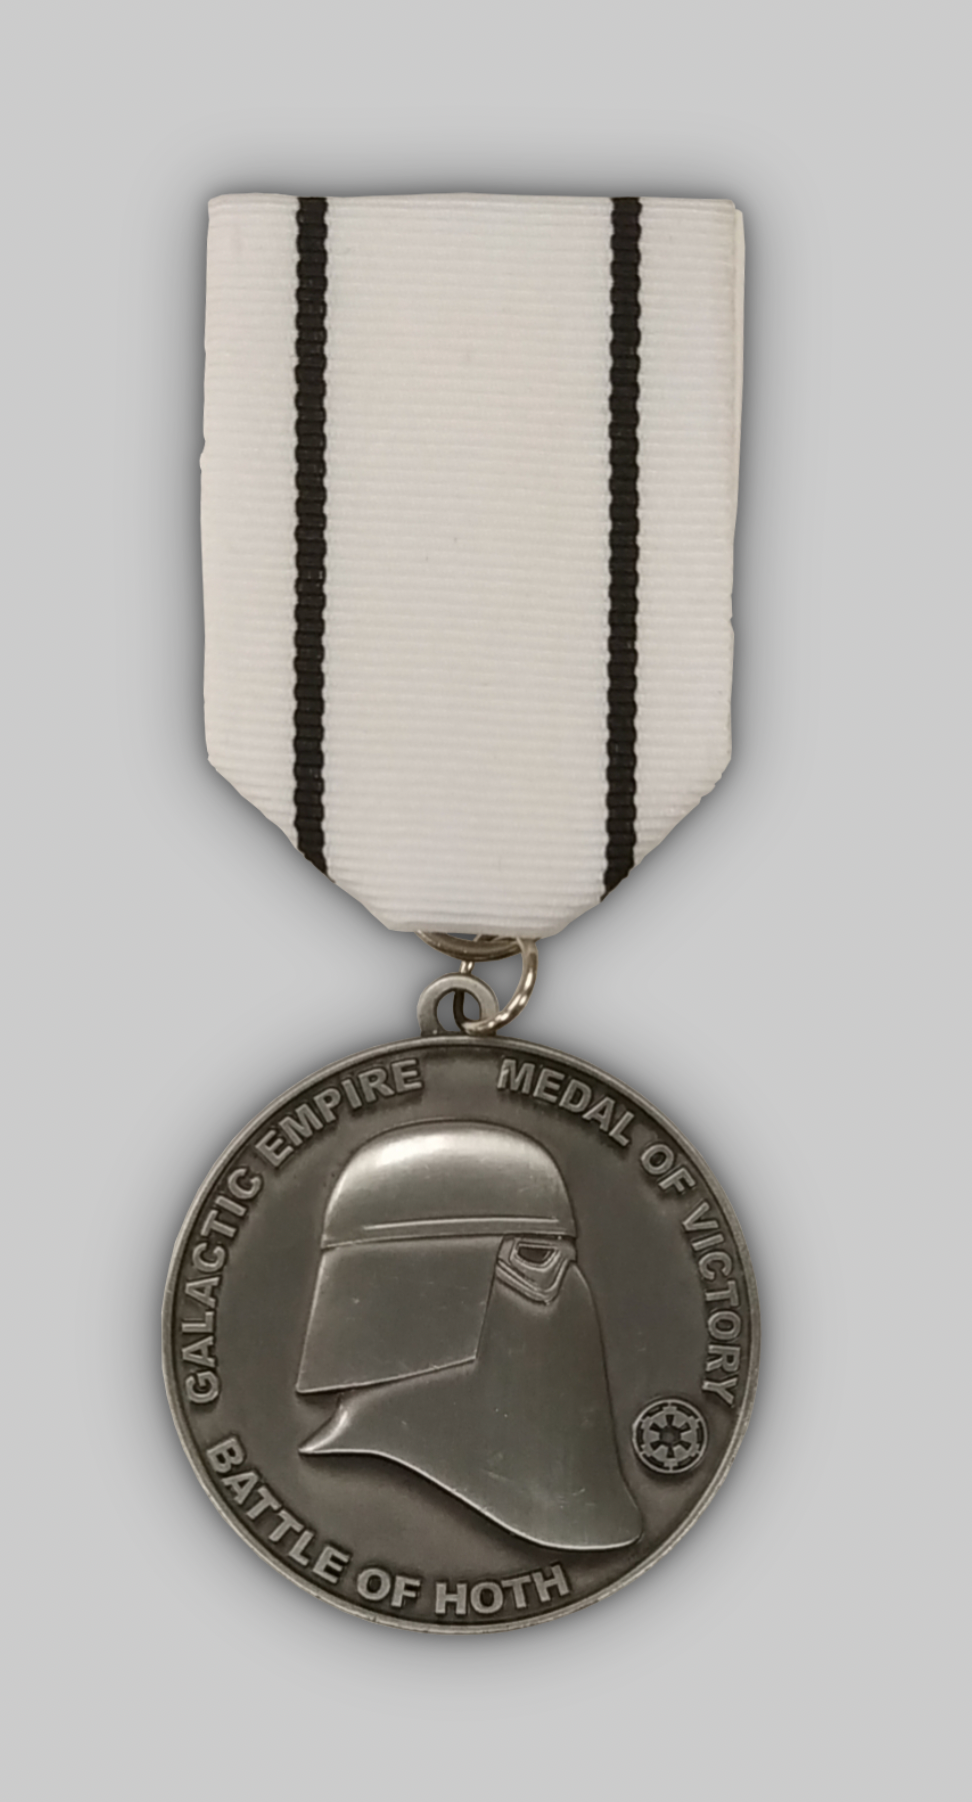 Battle of Hoth Medal of Victory